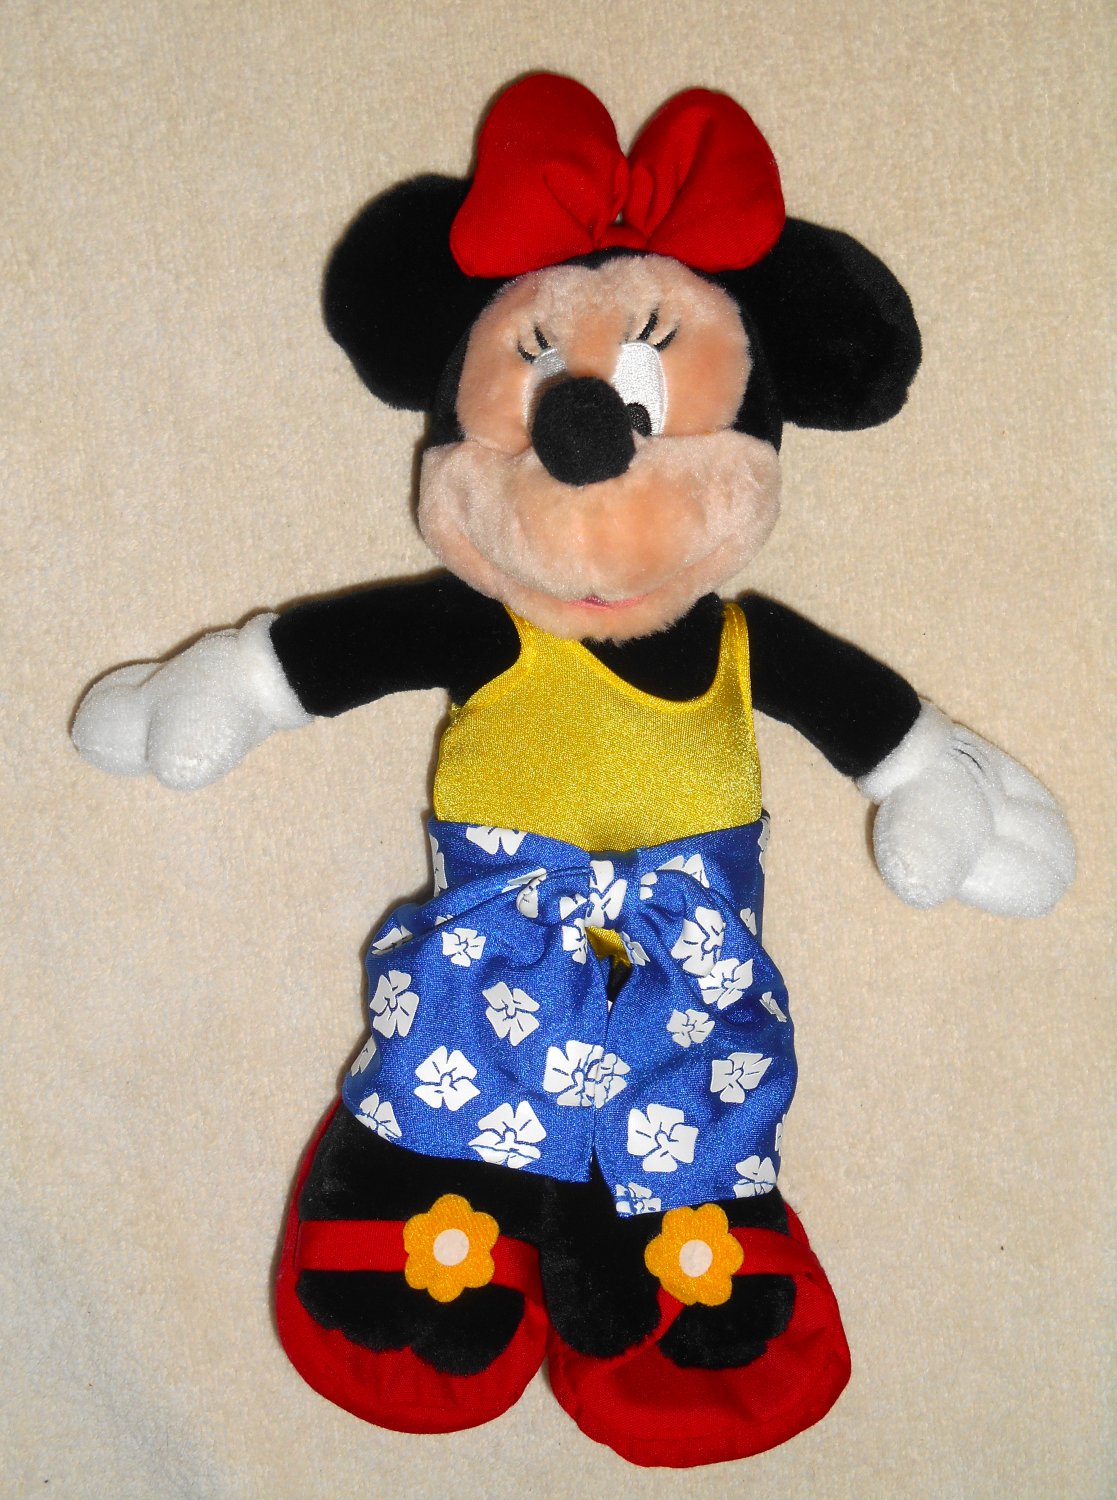 Disney Cruise Line Minnie Mouse 11" Beanbag Plush Doll Castaway Sarong Sandals Swimsuit Blue Yellow